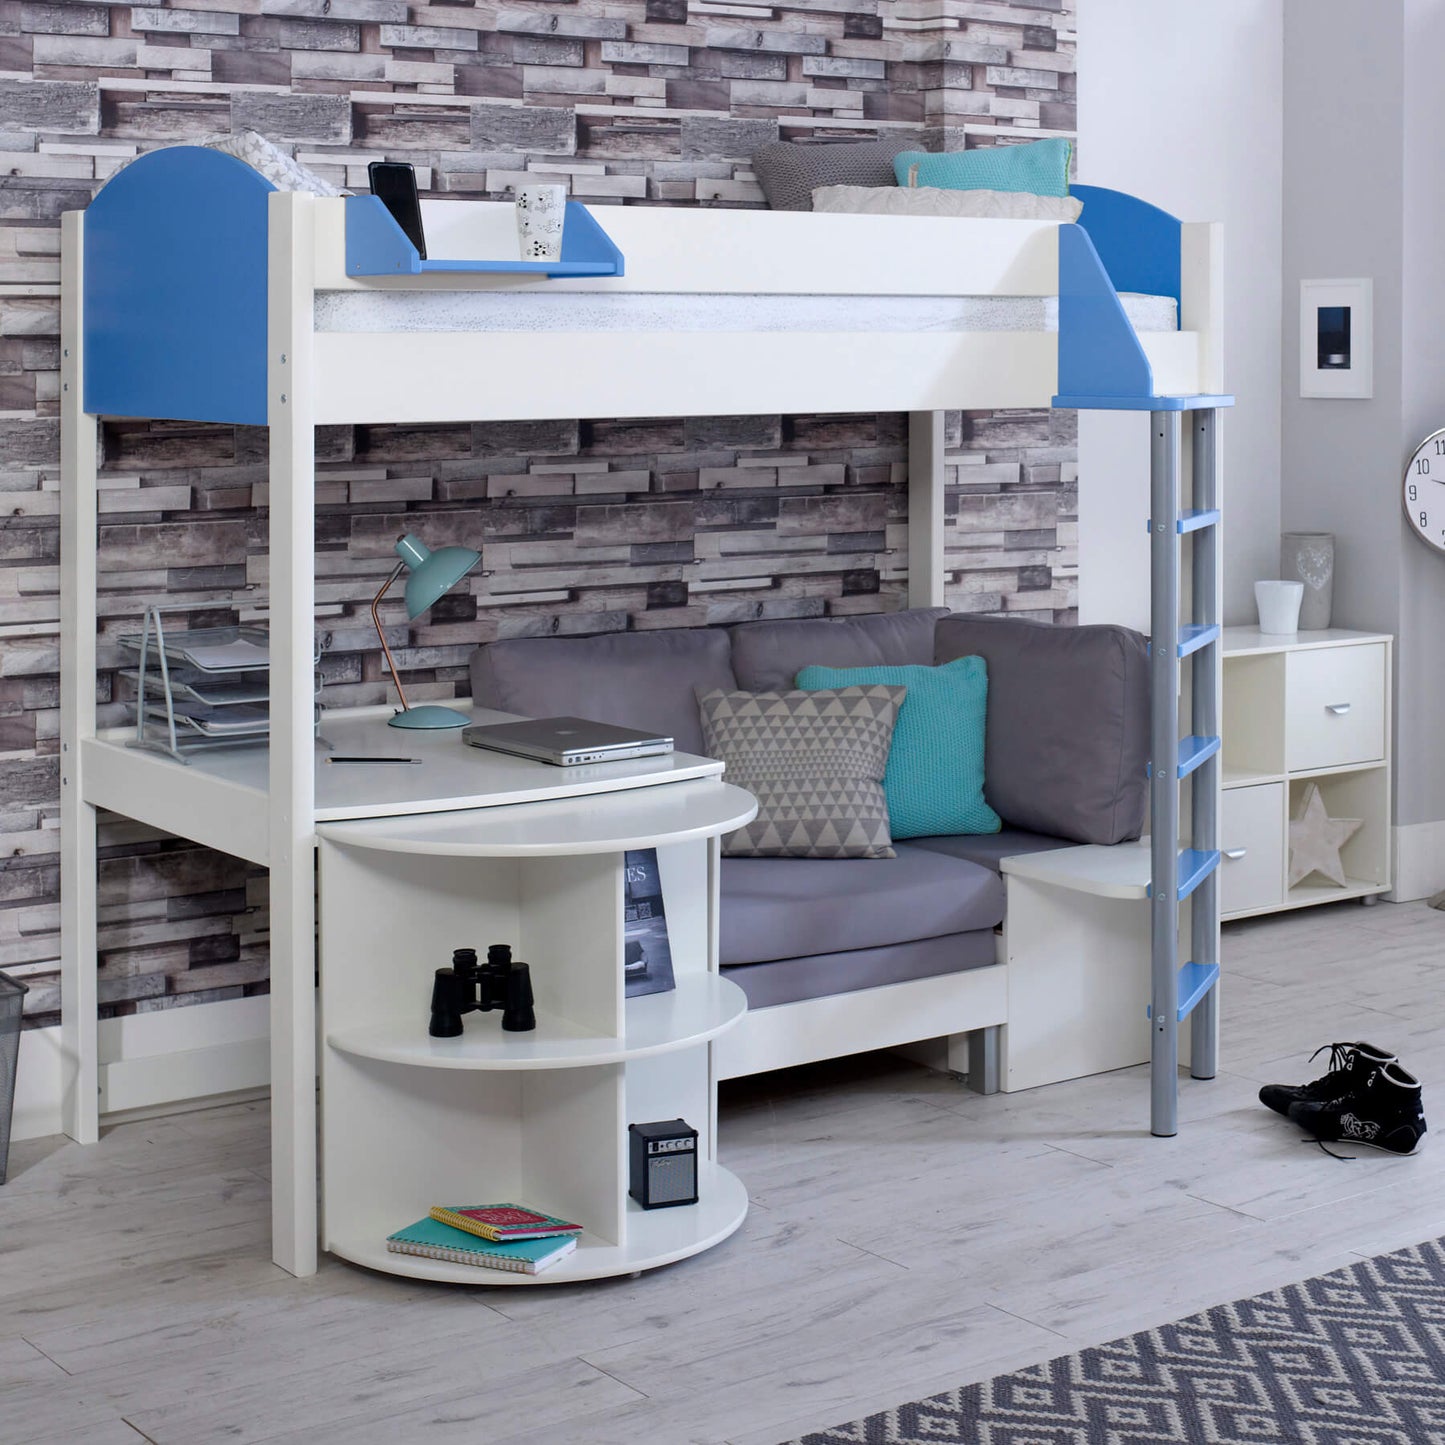 Noah & Eli Caleb High Sleeper Bed in Blue with Desk & Silver Chair Bed